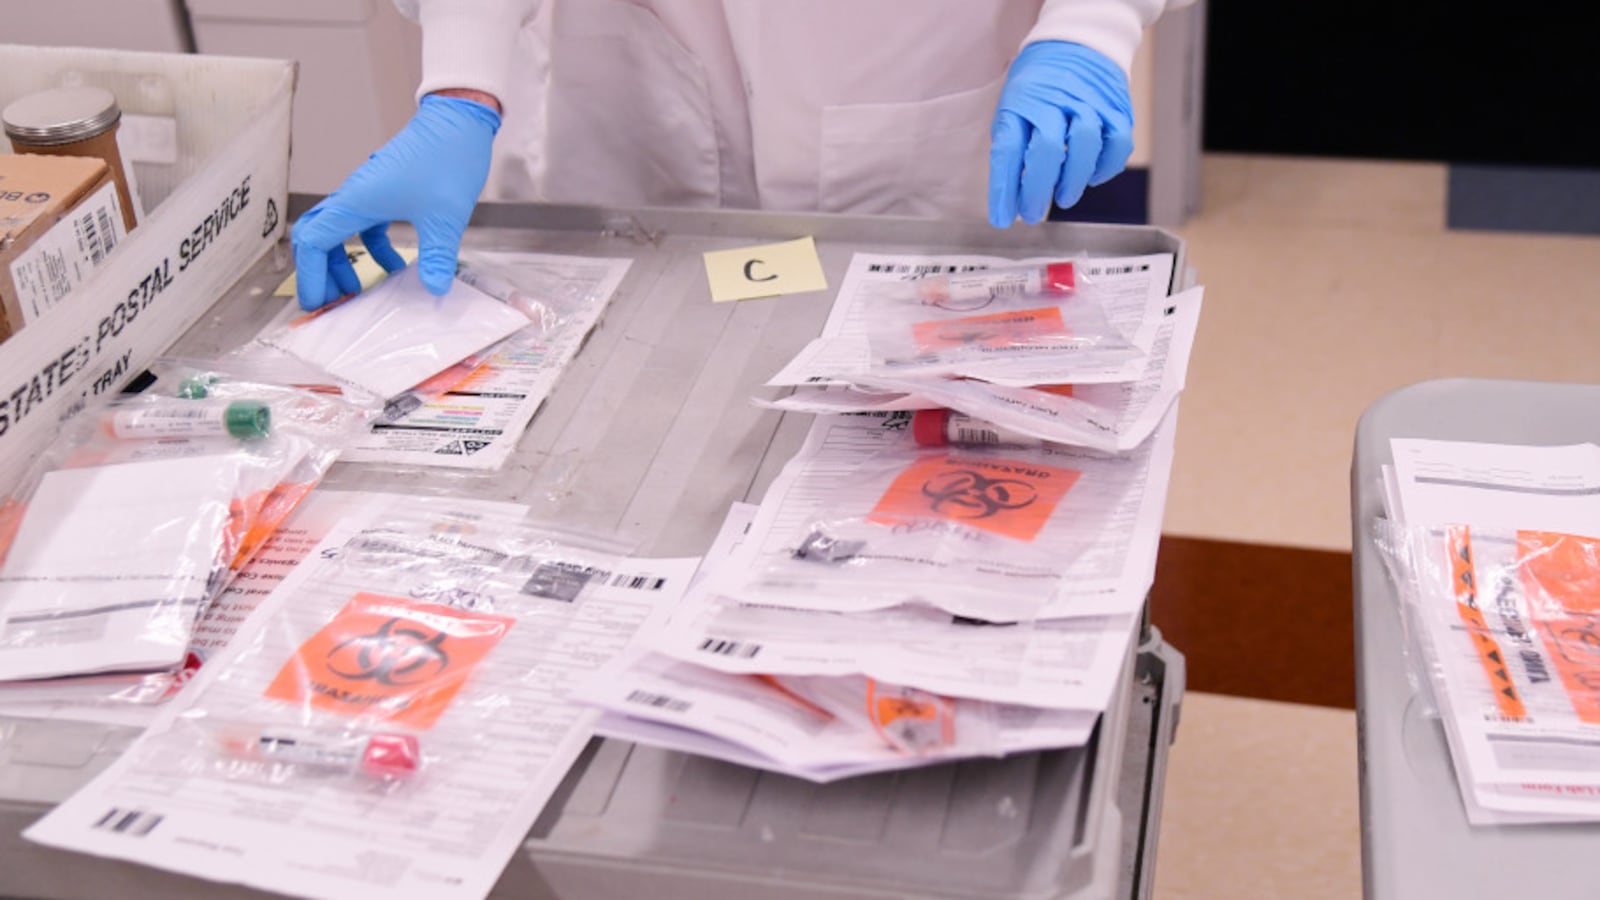 David Storey processes samples for COVID-19 at the Colorado Department of Public Health and Environment Laboratory Services Division in Denver, Colorado on March 14, 2020.